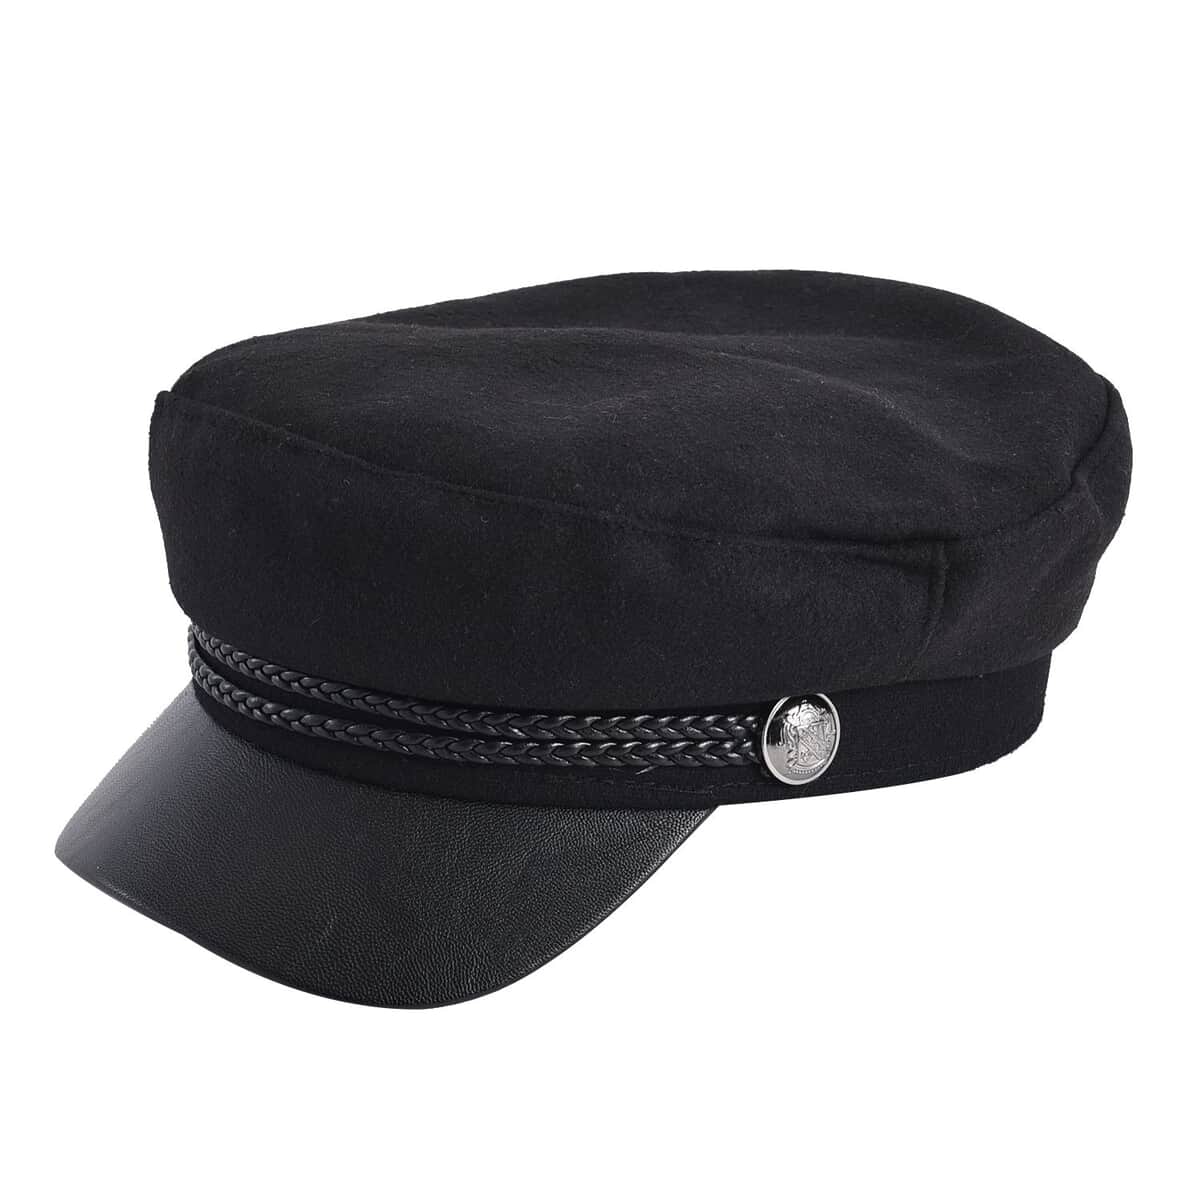 Black Fiddler Cap - (Diameter 22-23 Inches and Height -2.75 Inches) image number 1